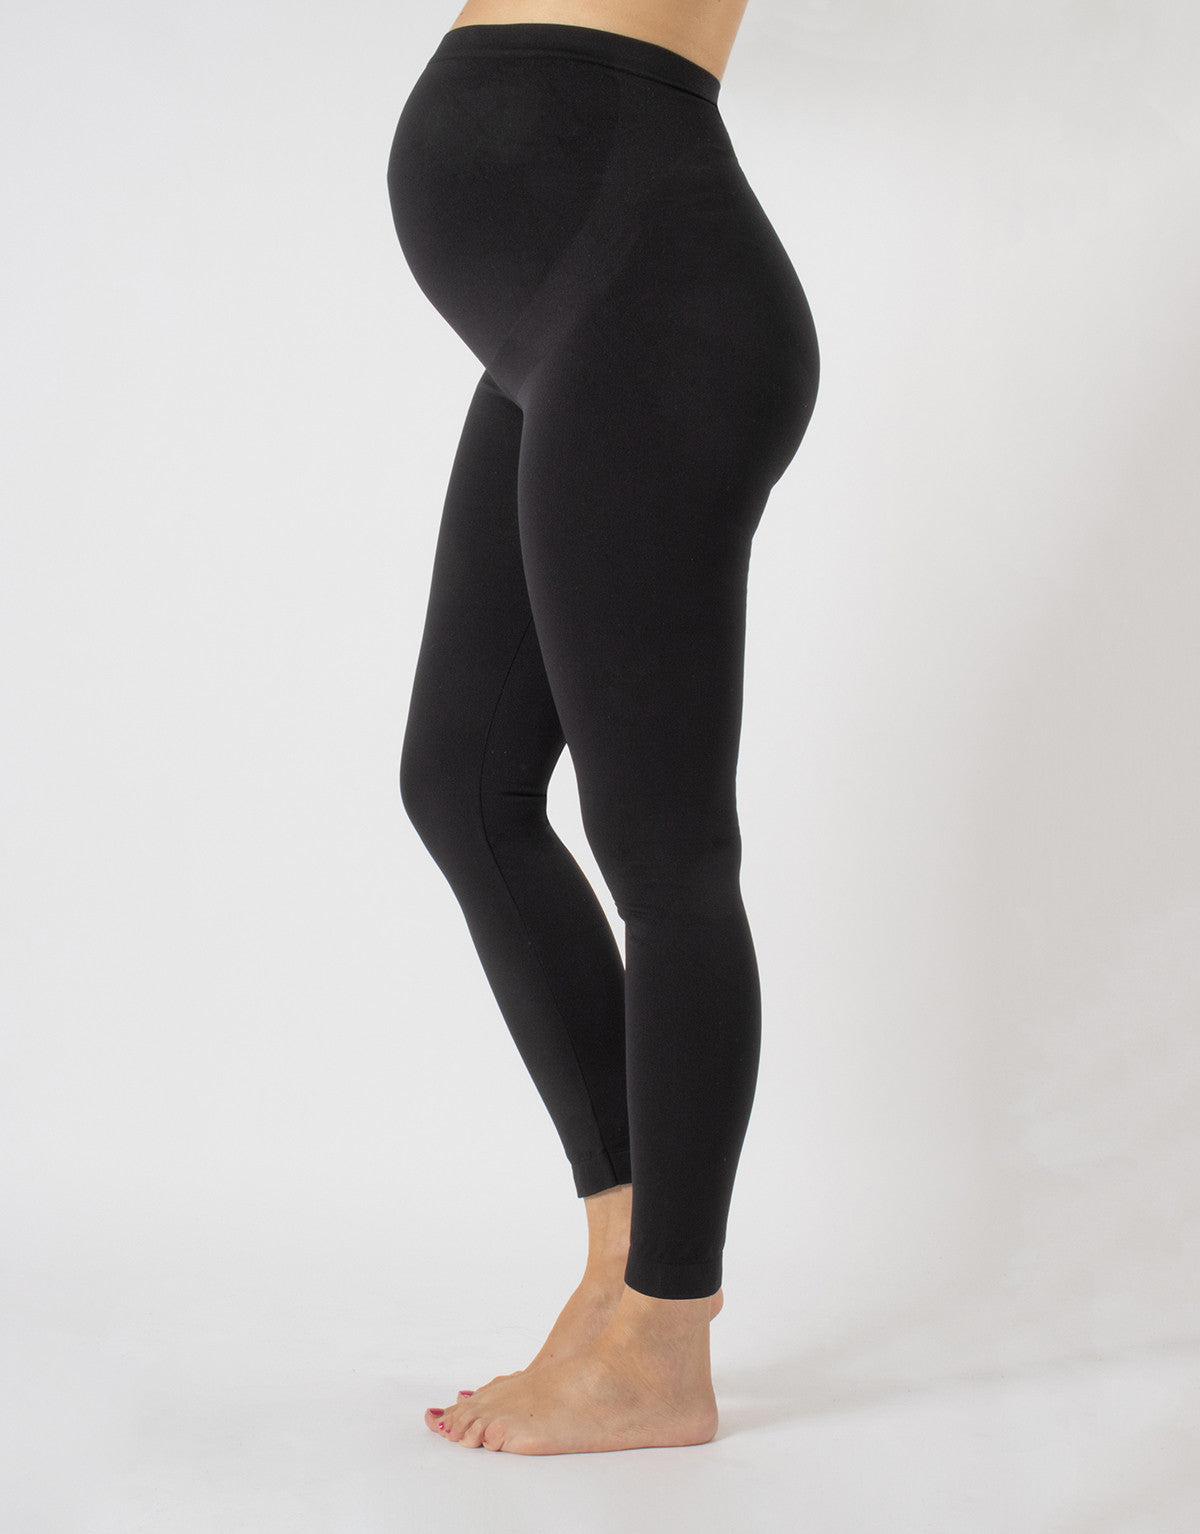 Calzitaly Maternity Leggings - Soft and plain black pregnancy leggings with a high waisted structured brief top for a comfortable fit throughout pregnancy.